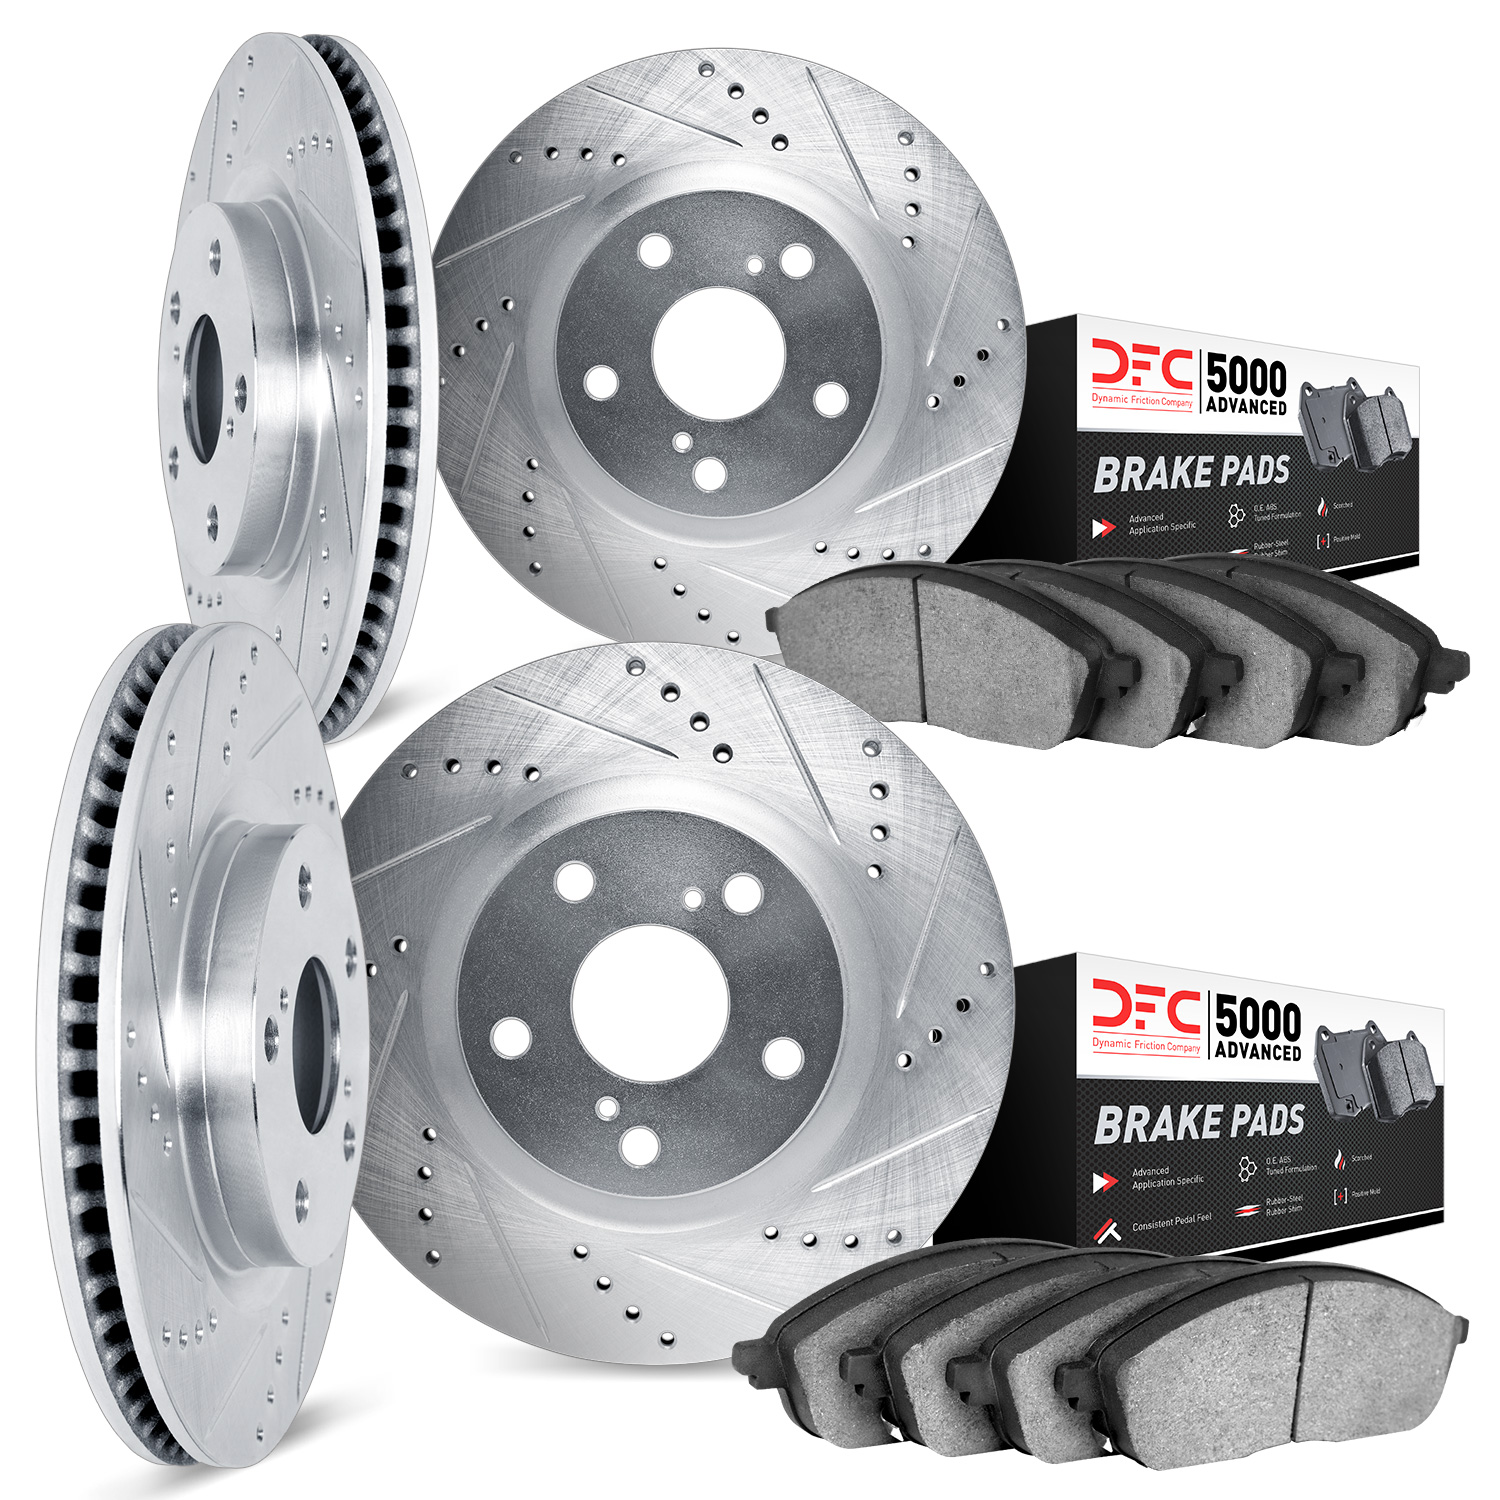 7504-47261 Drilled/Slotted Brake Rotors w/5000 Advanced Brake Pads Kit [Silver], 2007-2015 GM, Position: Front and Rear